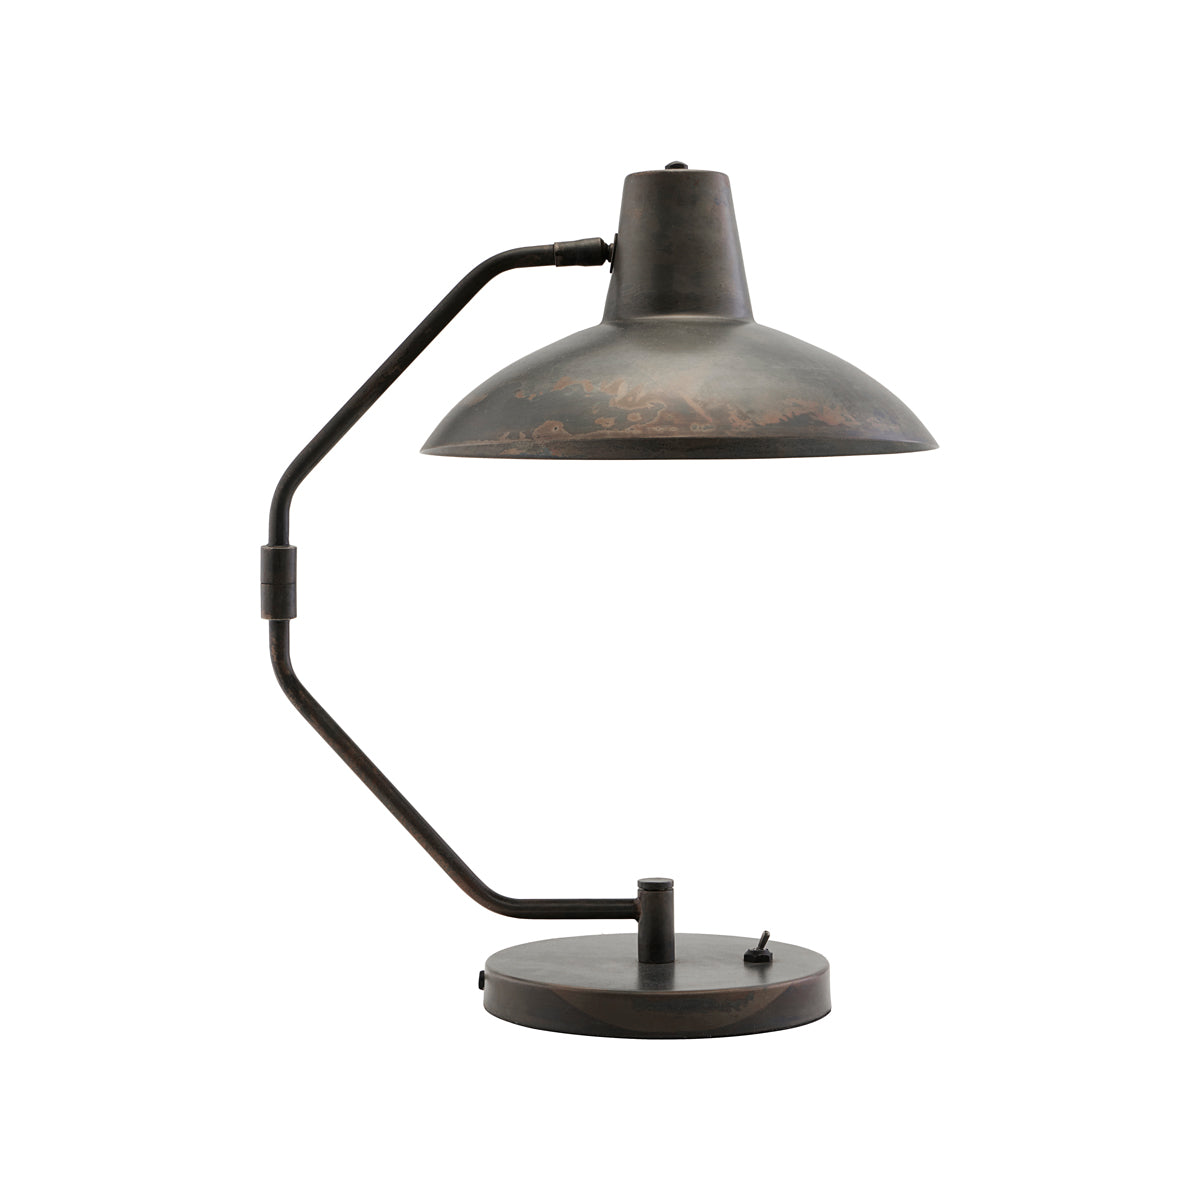 Table lamp, Desk, Antique brown scandi interiors from house doctor 